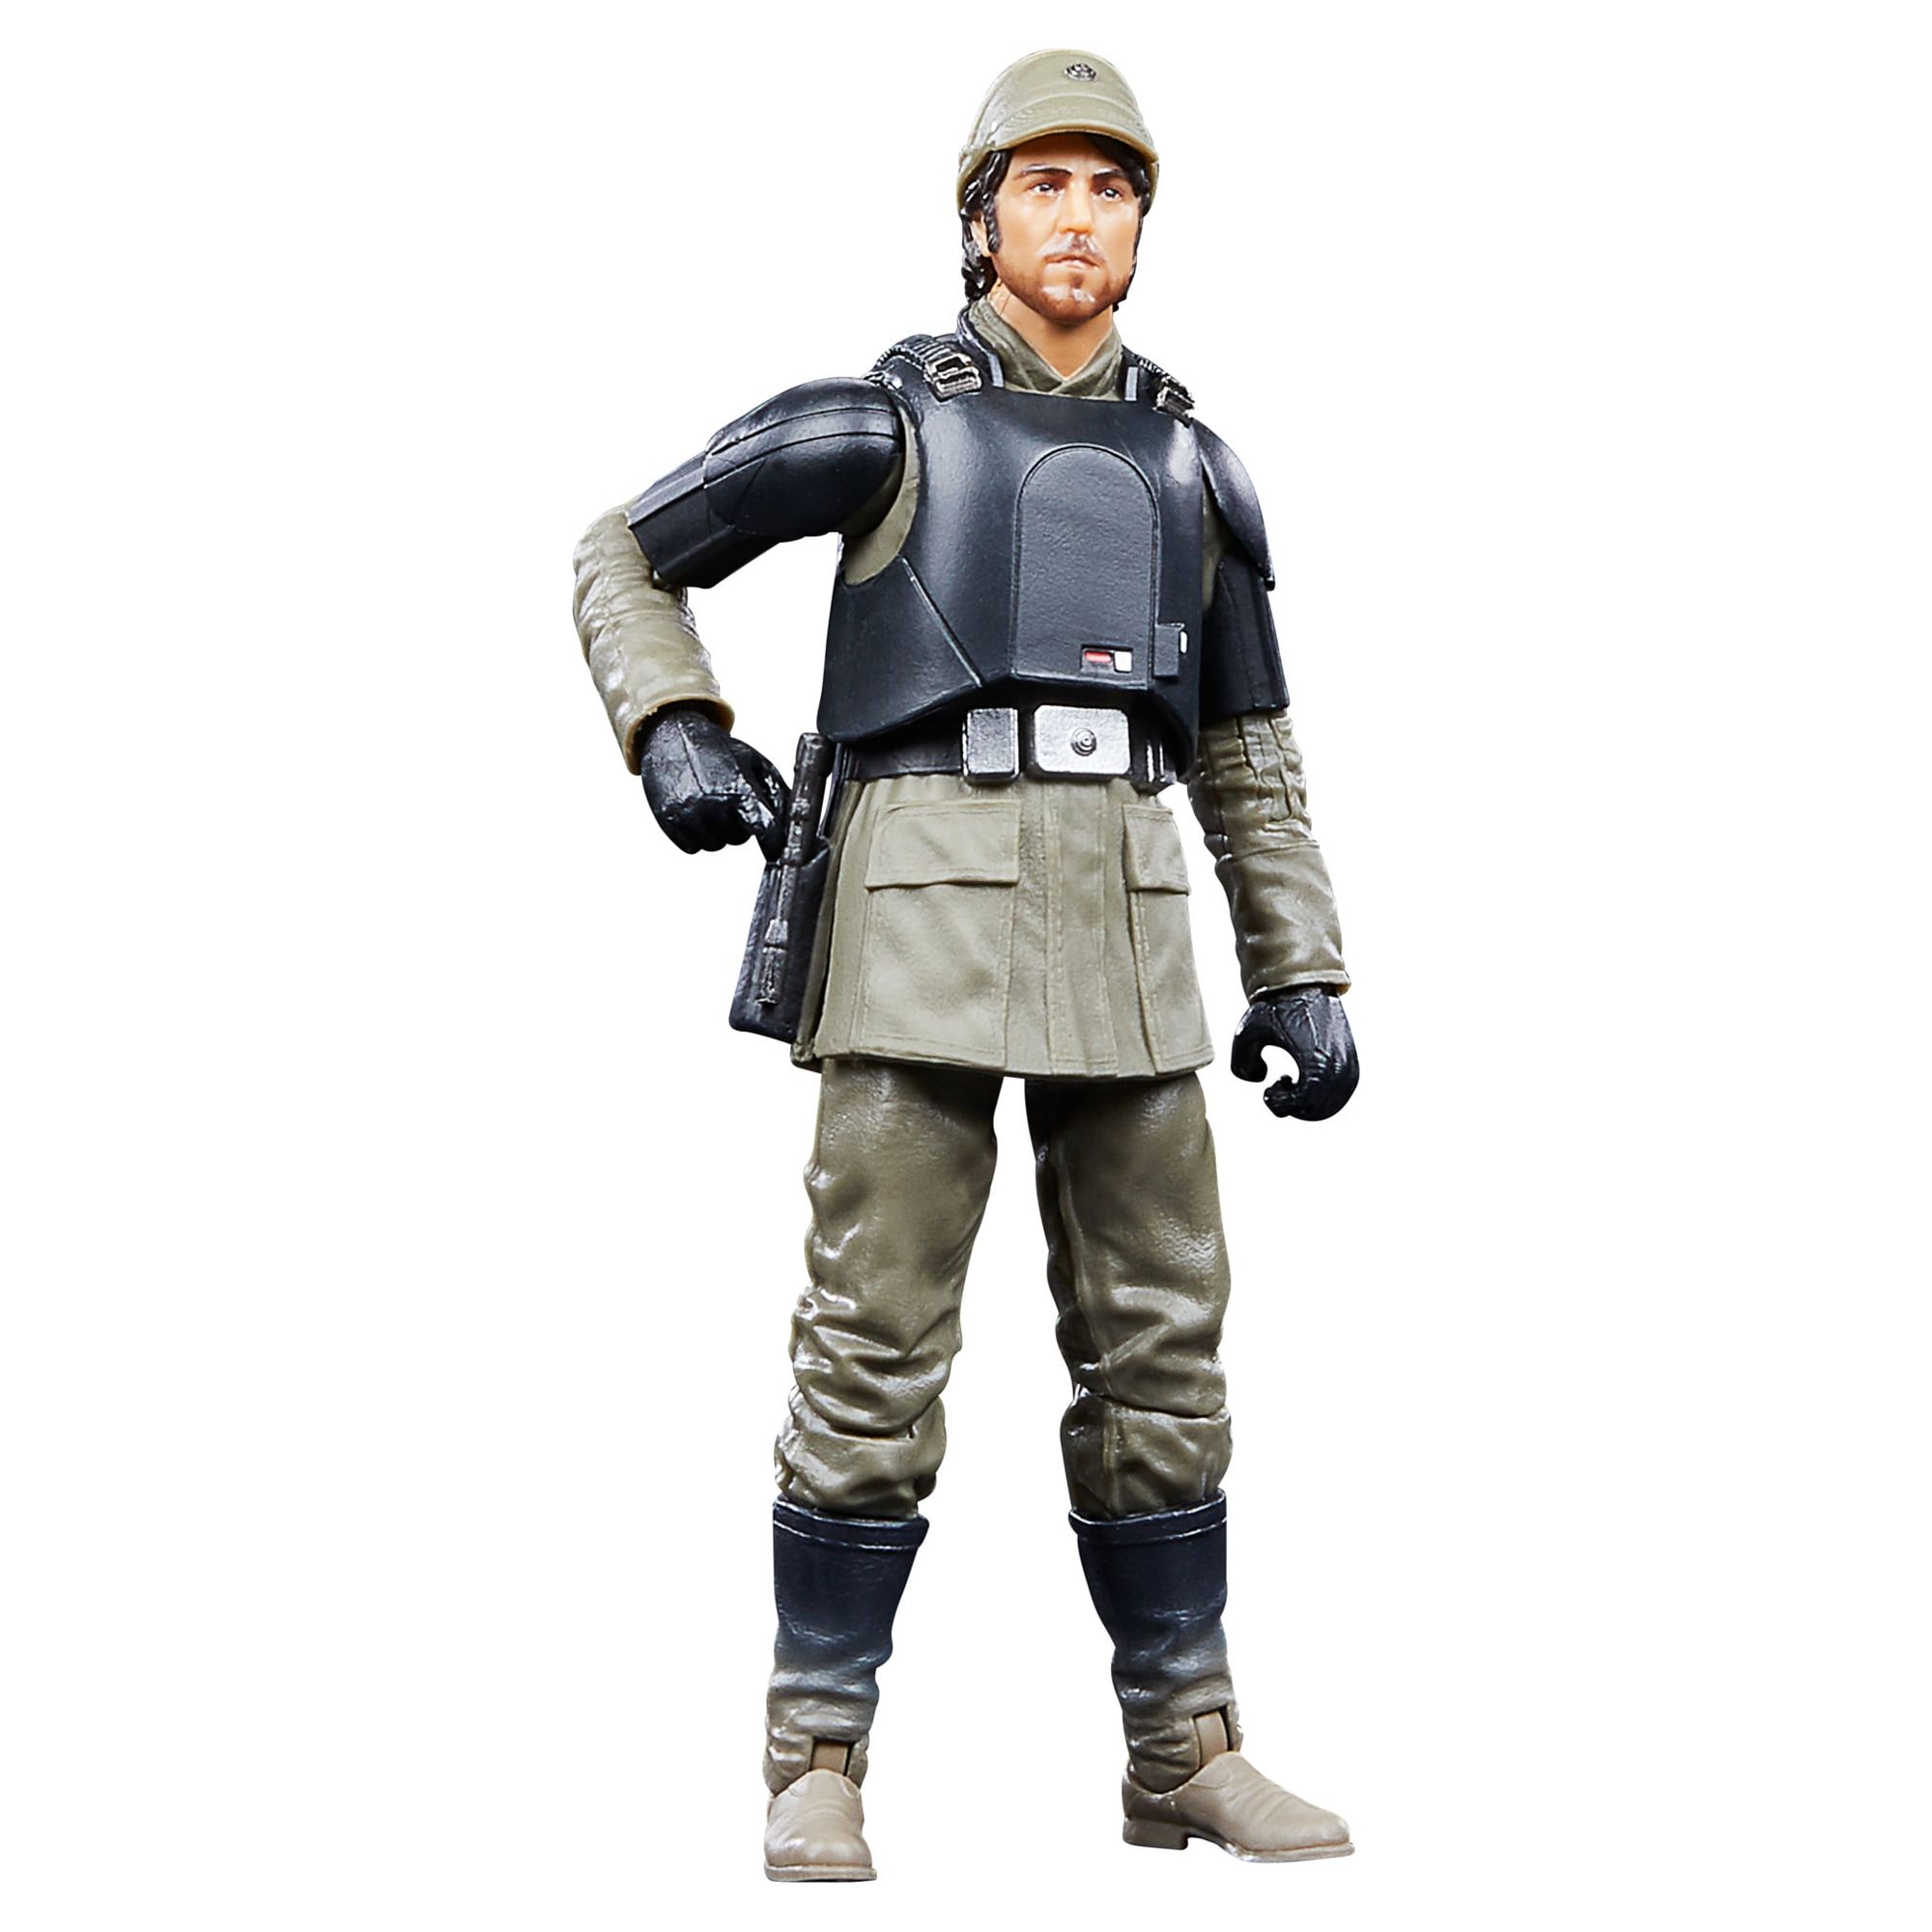 Star Wars: the Black Series Cassian Andor (Aldhani Mission) Kids Toy Action Figure for Boys and Girls Ages 4 5 6 7 8 and Up, Only At Walmart - image 4 of 9